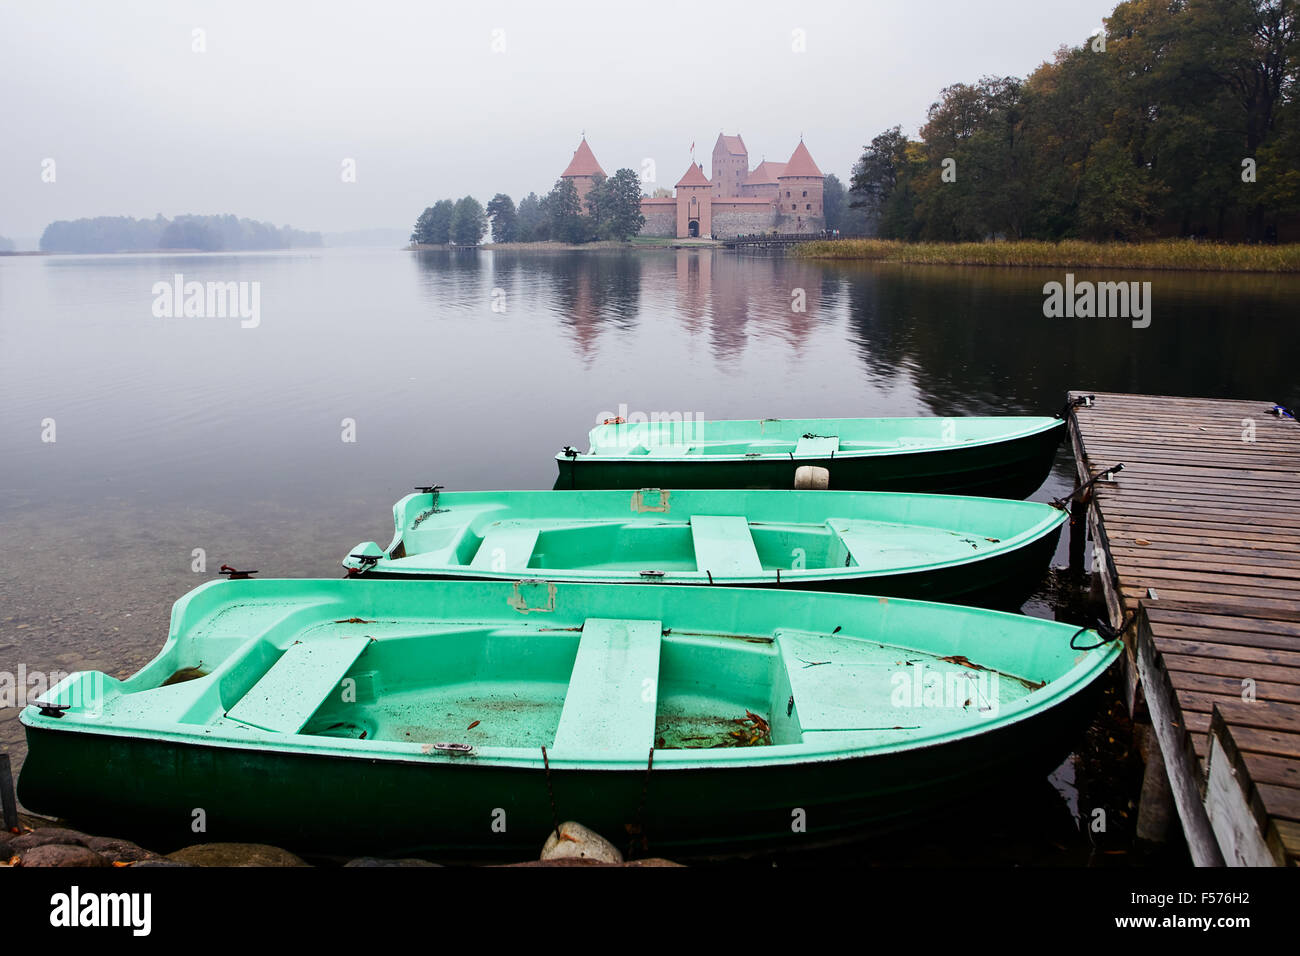 Boat and castle in Trakai on the lake Stock Photo